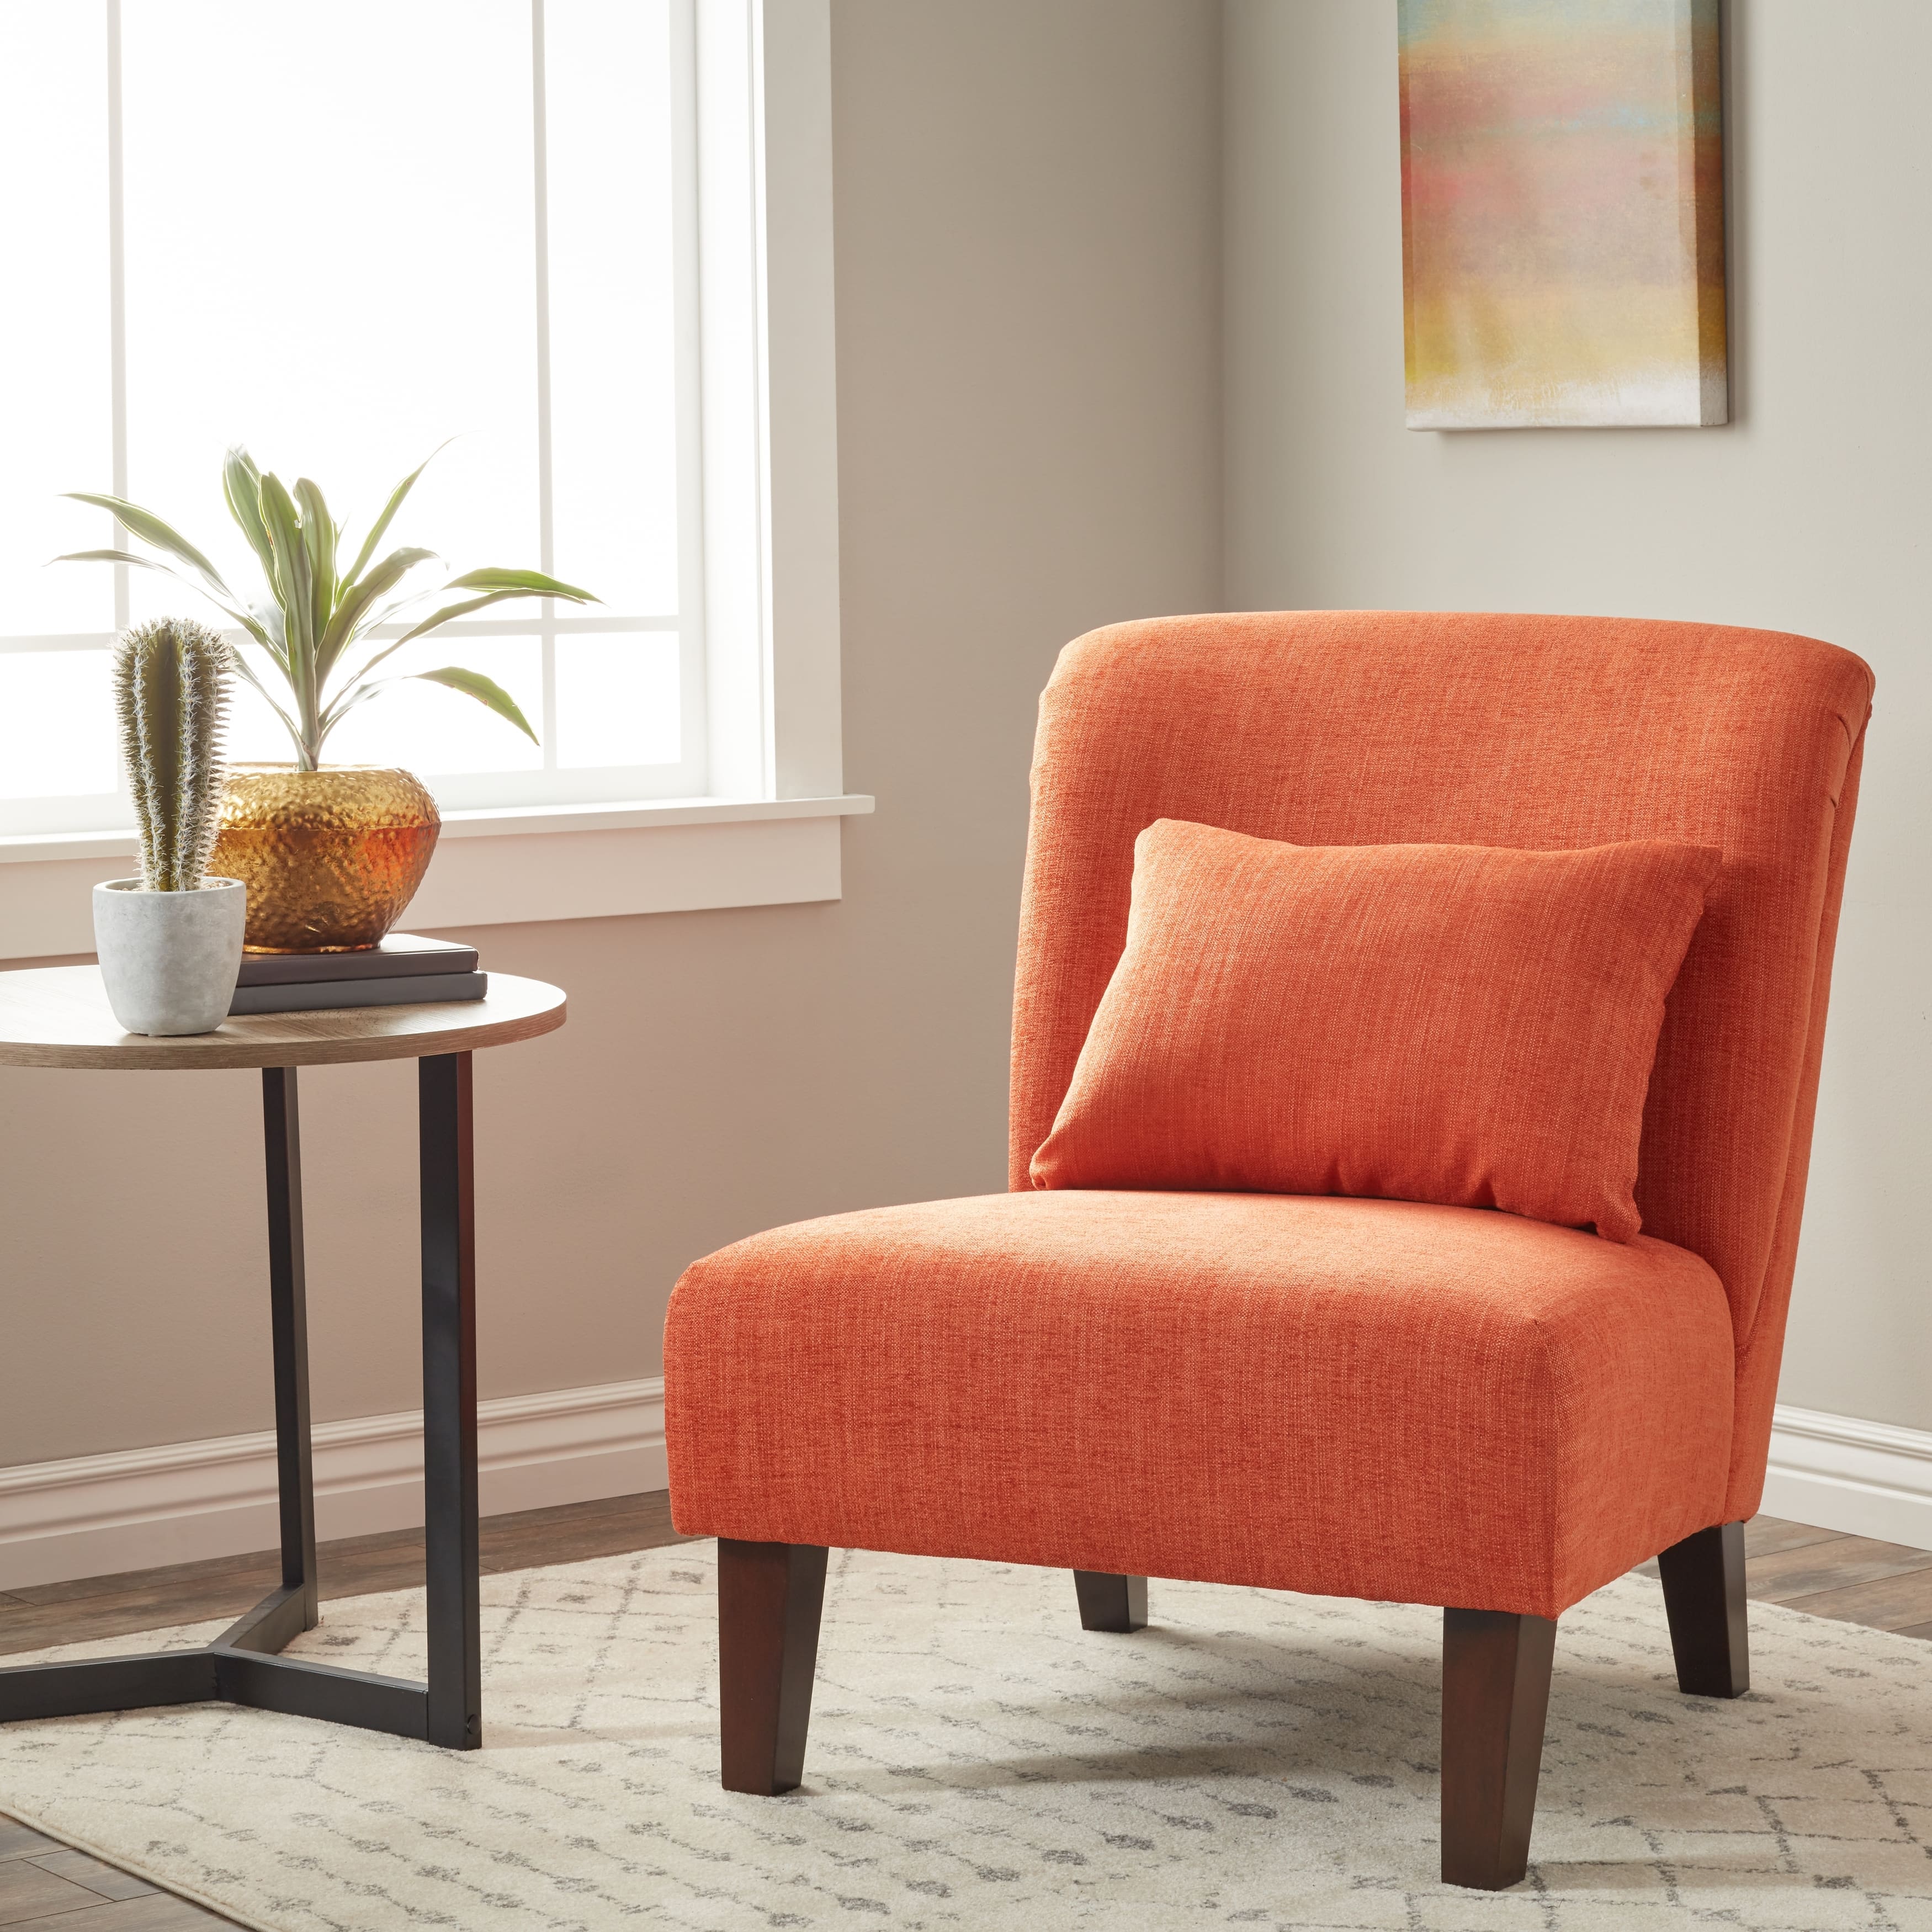 Buy Living Room Chairs Online at Overstock | Our Best Living Room Furniture Deals